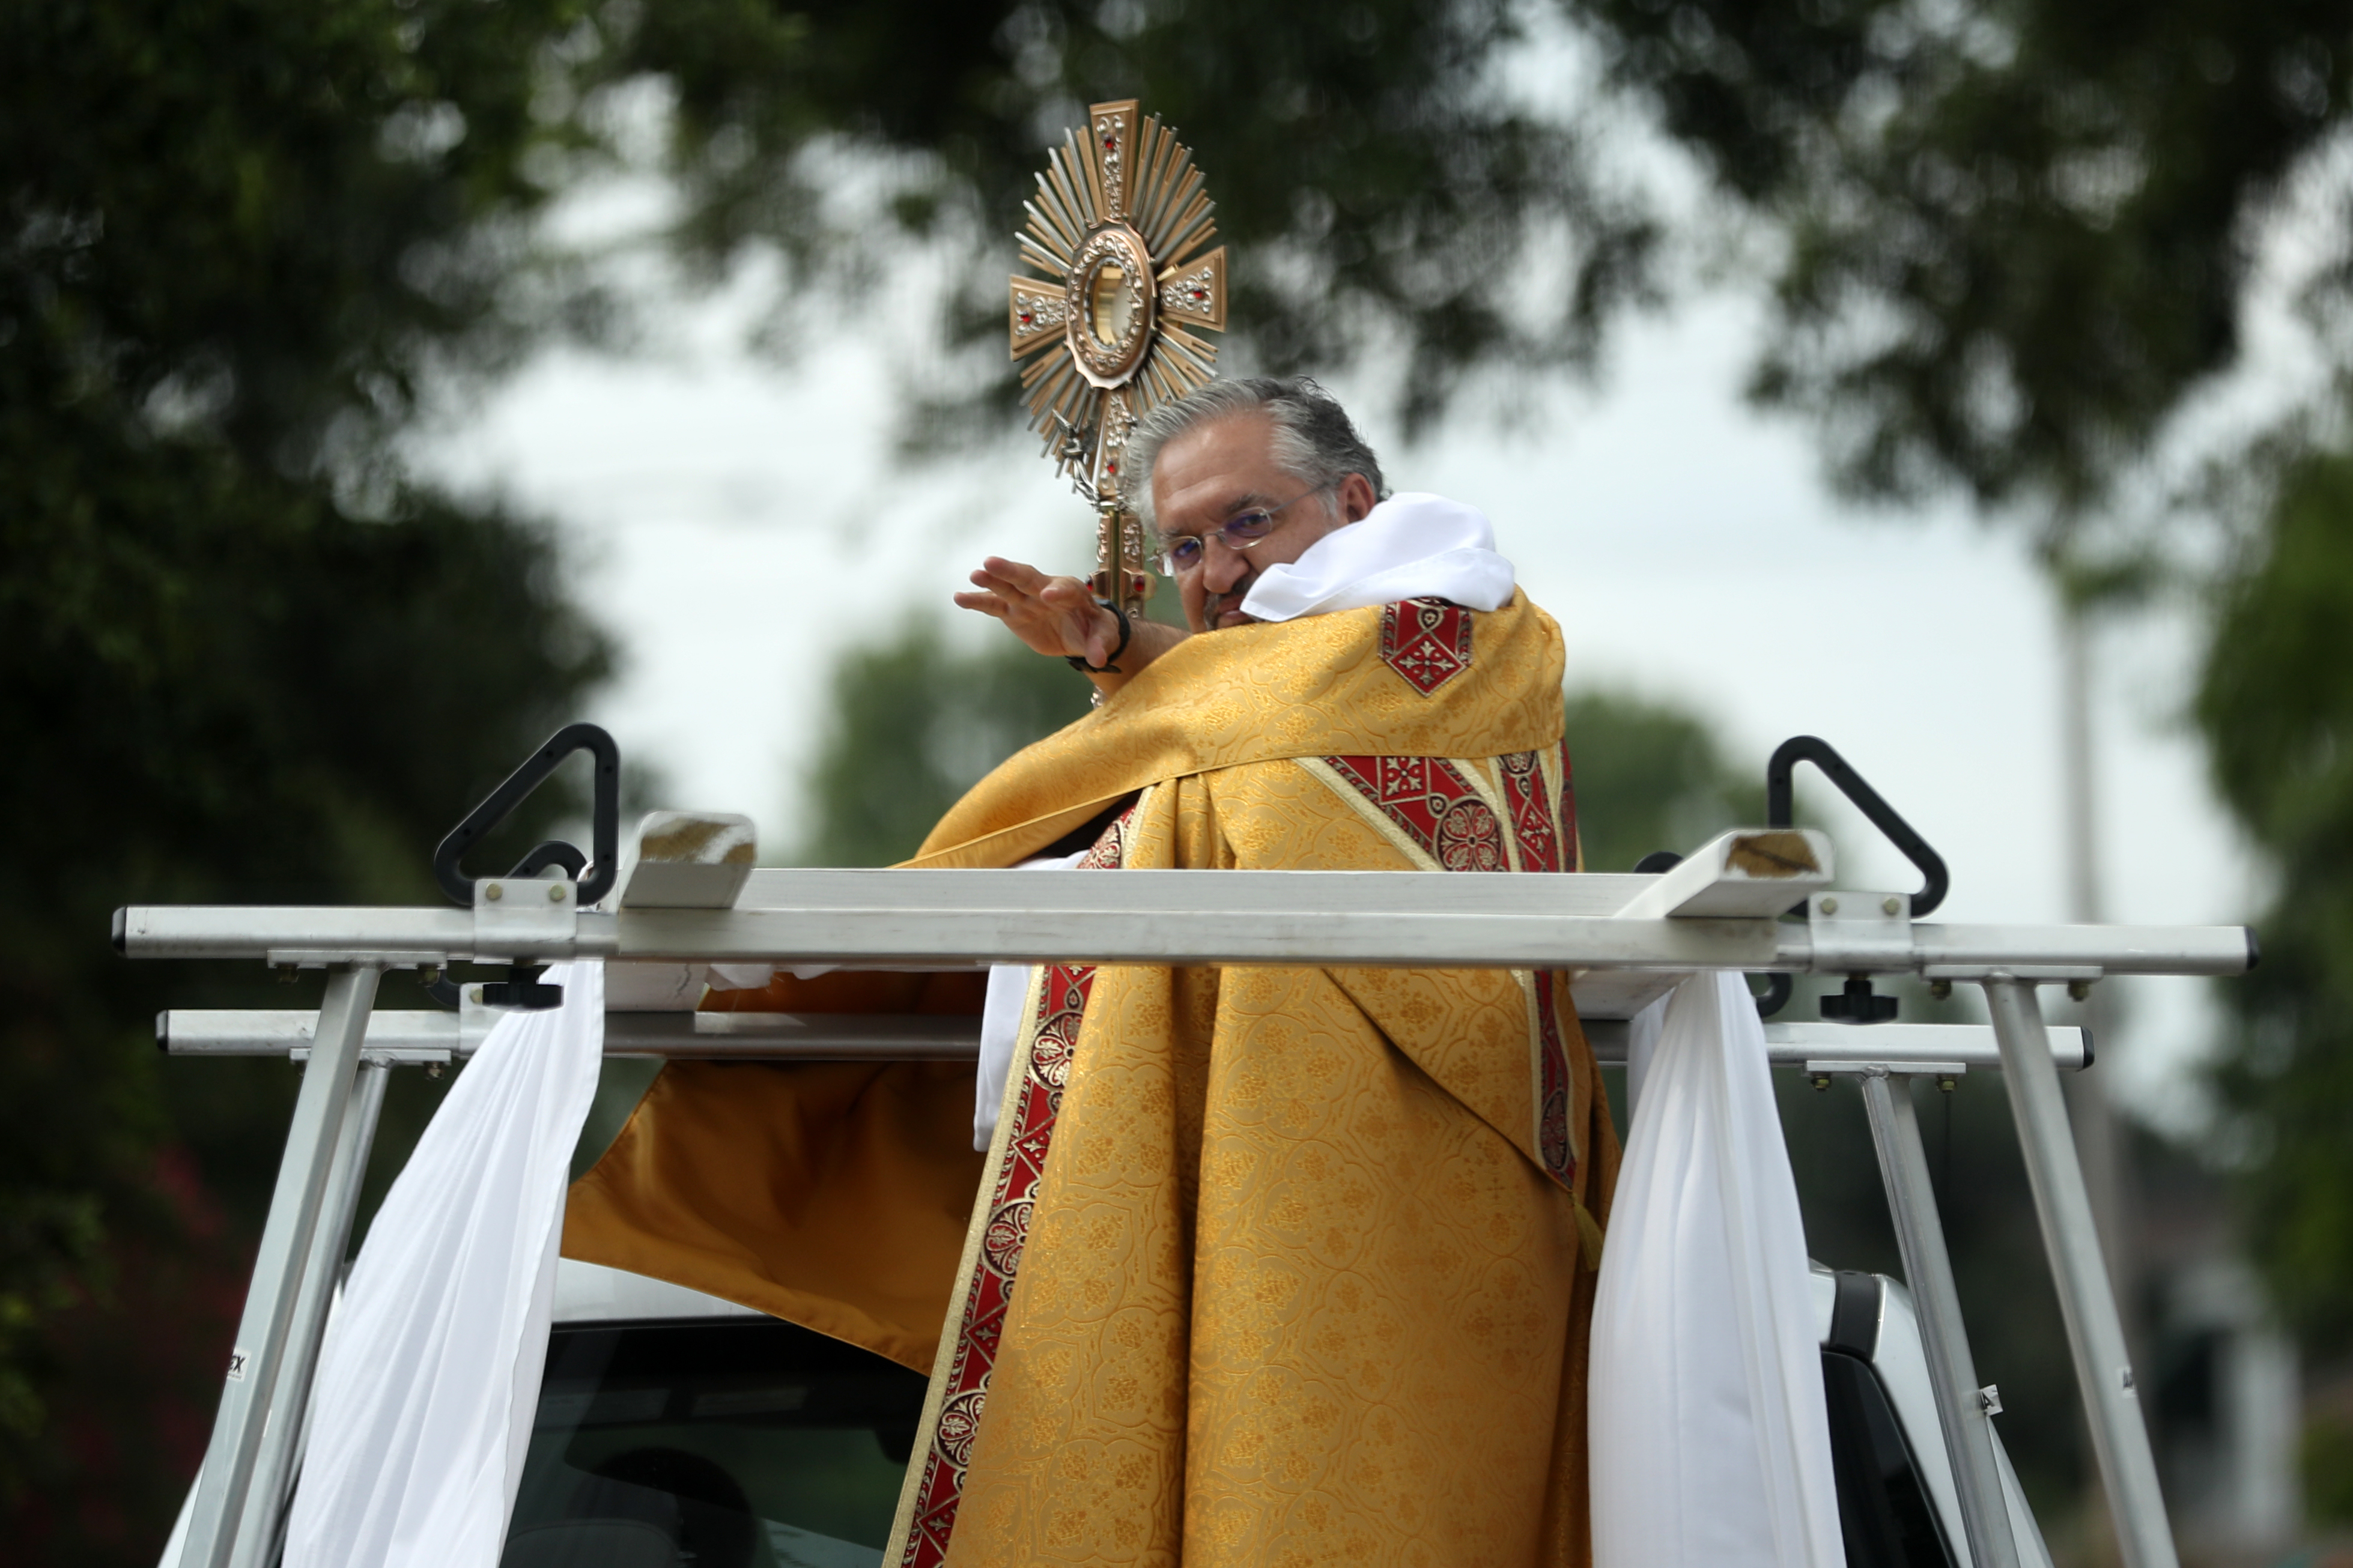 Rev. John G. Restrepo, O.P., V.F., pastor of St. Dominic Catholic Church, rides in a truck with the Hope Monstrance on Holy Wednesday to bless residents in the Lakeview neighborhood on April 08, 2020 in New Orleans, Louisiana. (Photo by Chris Graythen/Getty Images)